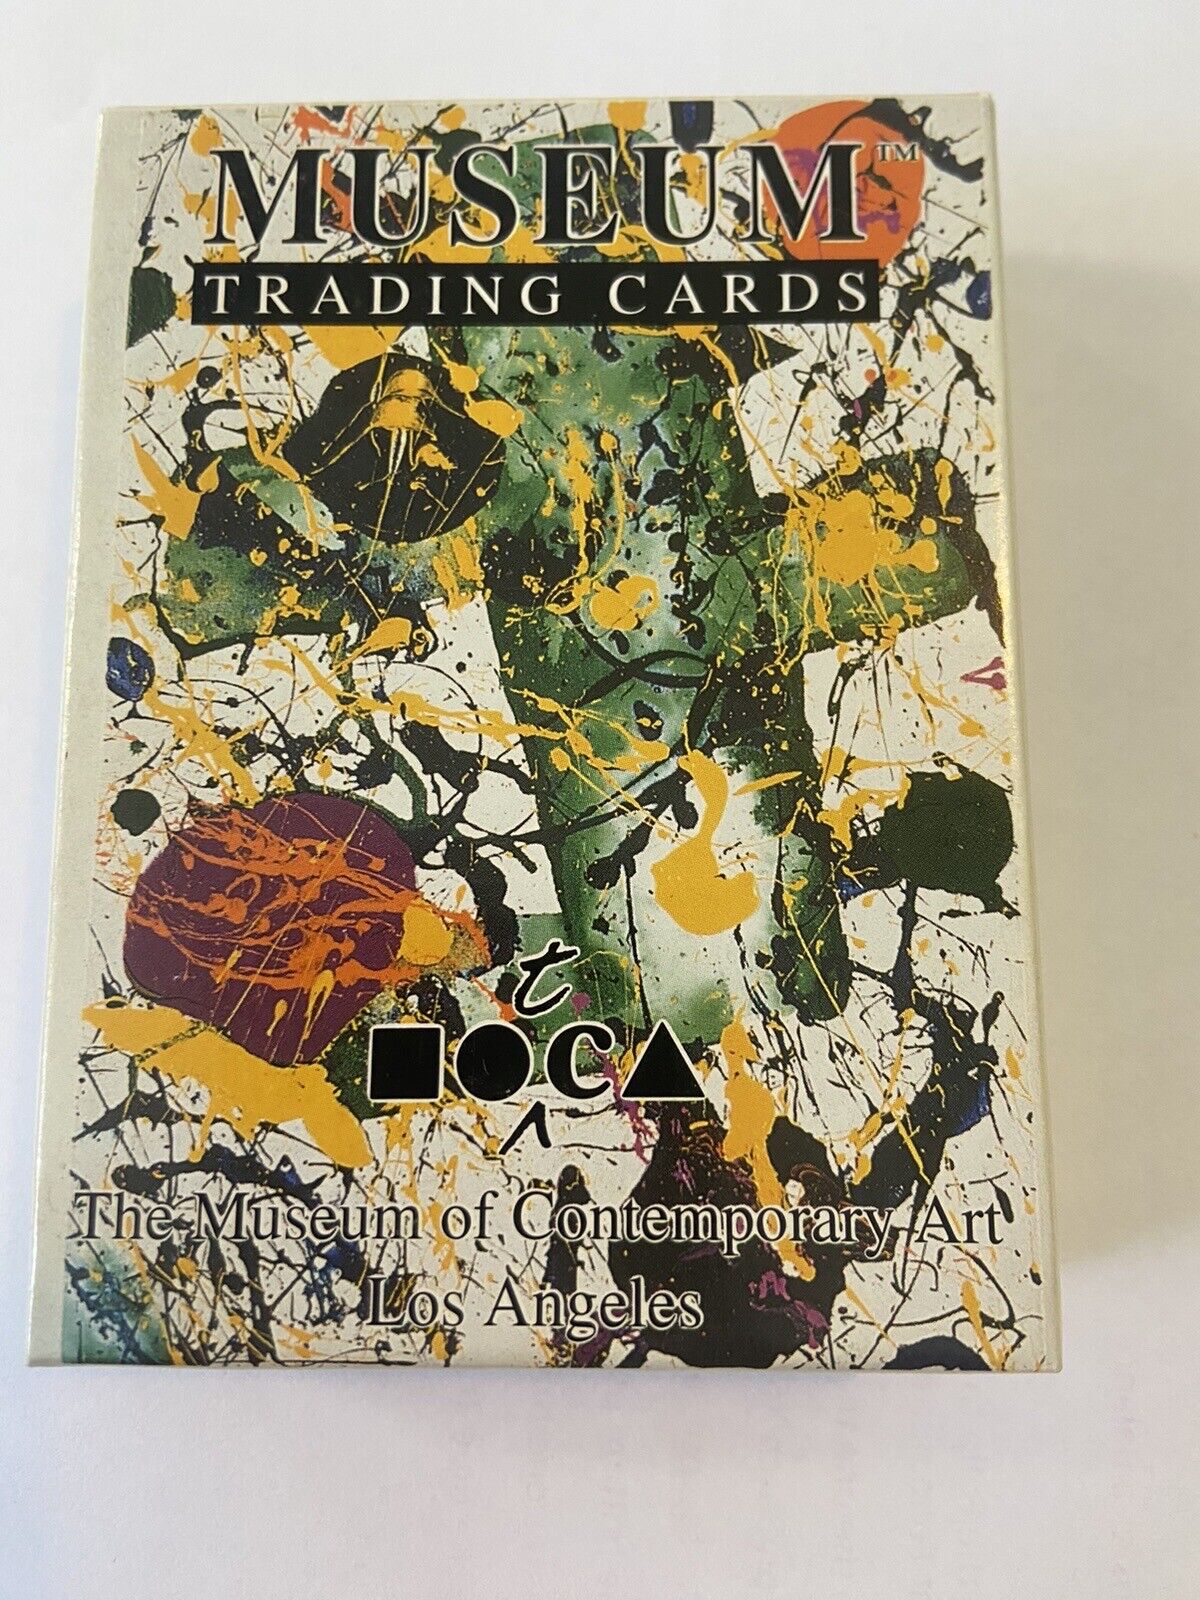 Rare- out of print-   Museum of Contemporary Art, Los Angles trading cards. 